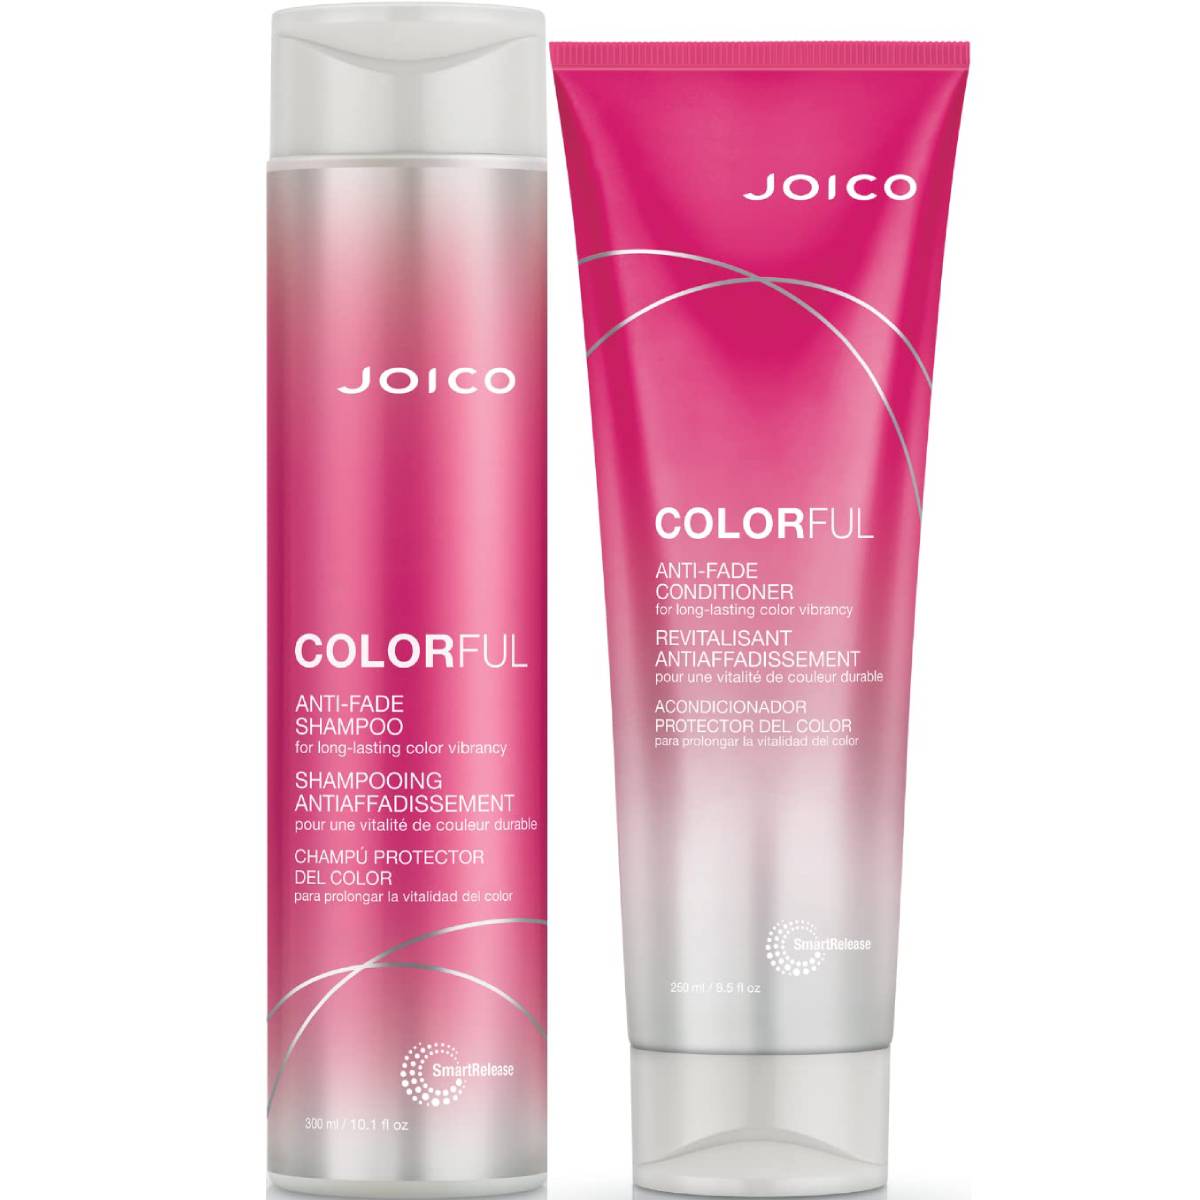 Joico Colorful Shampoo 300ml and Conditioner 250ml Gift Set